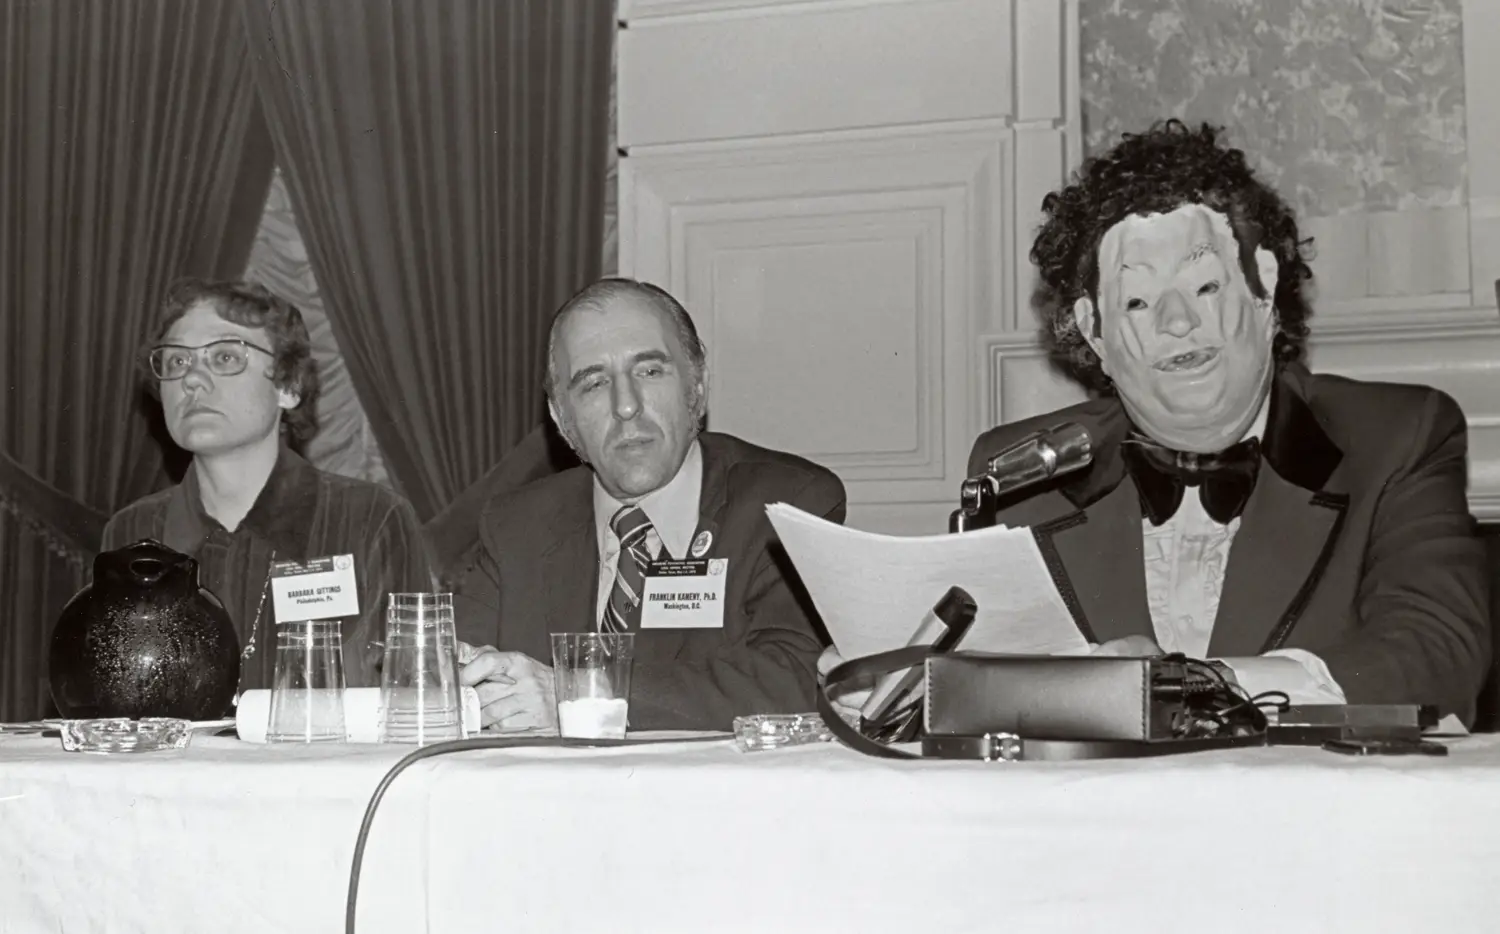 From left to right, a woman, man and person wearing a wig and mask are seated at a conference table. 